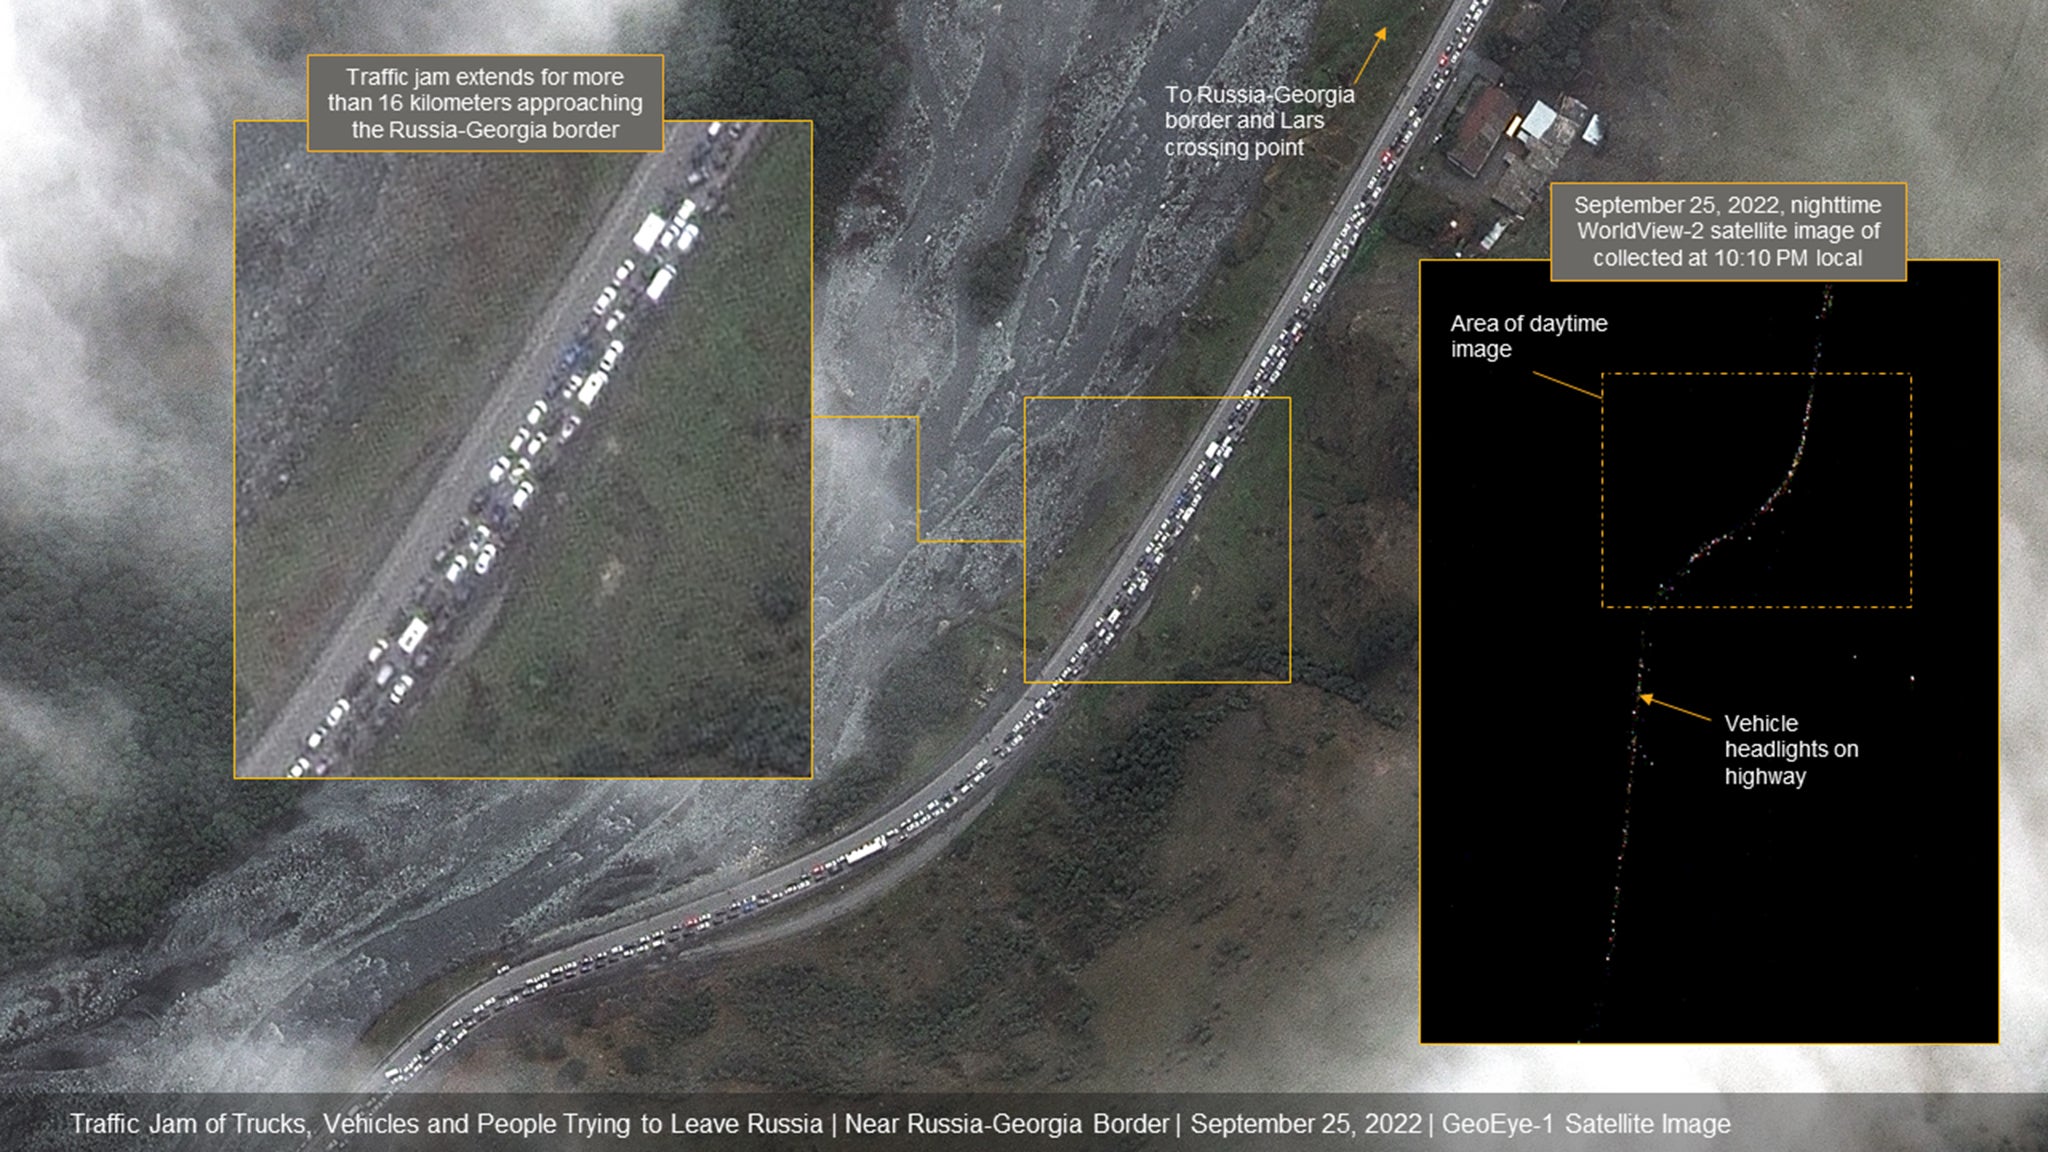 The traffic jam sparked by people trying to flee Russia could be seen from space